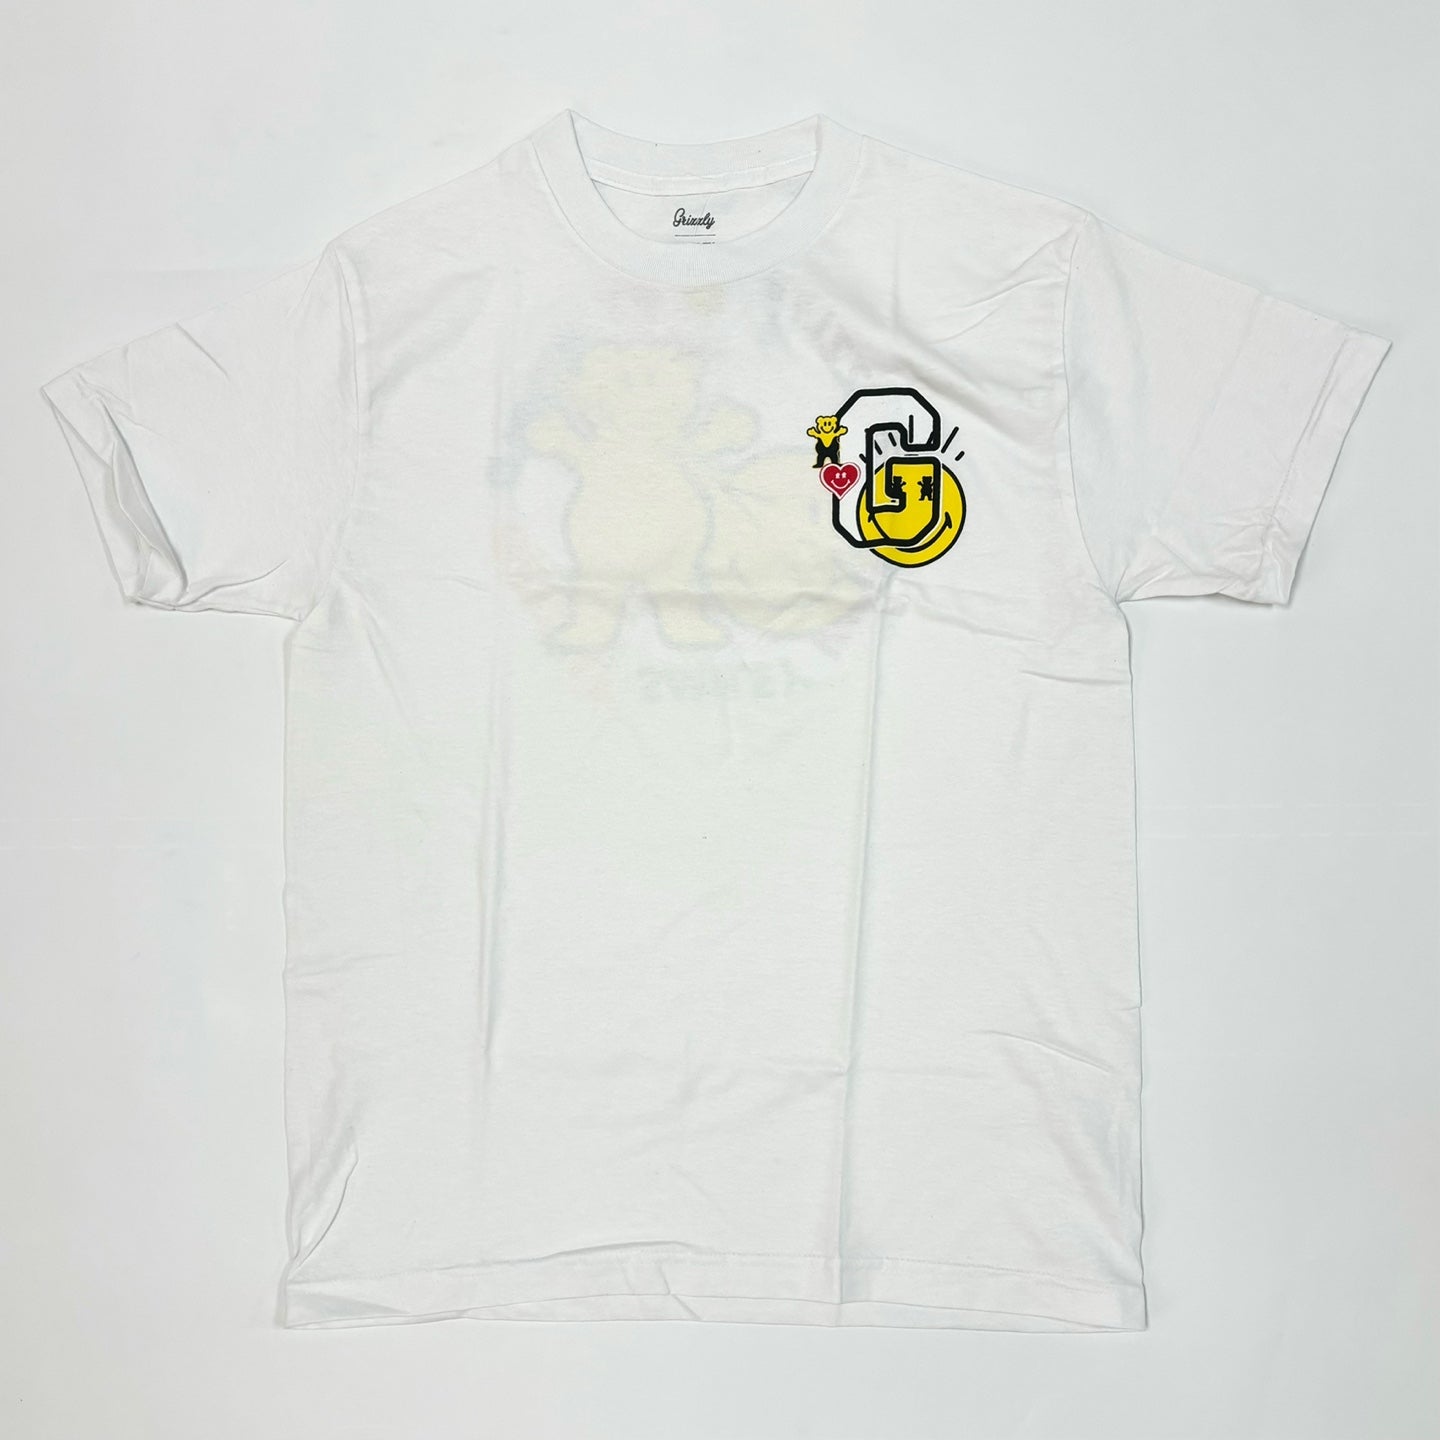 Grizzly x Smiley World Graphic T-shirt